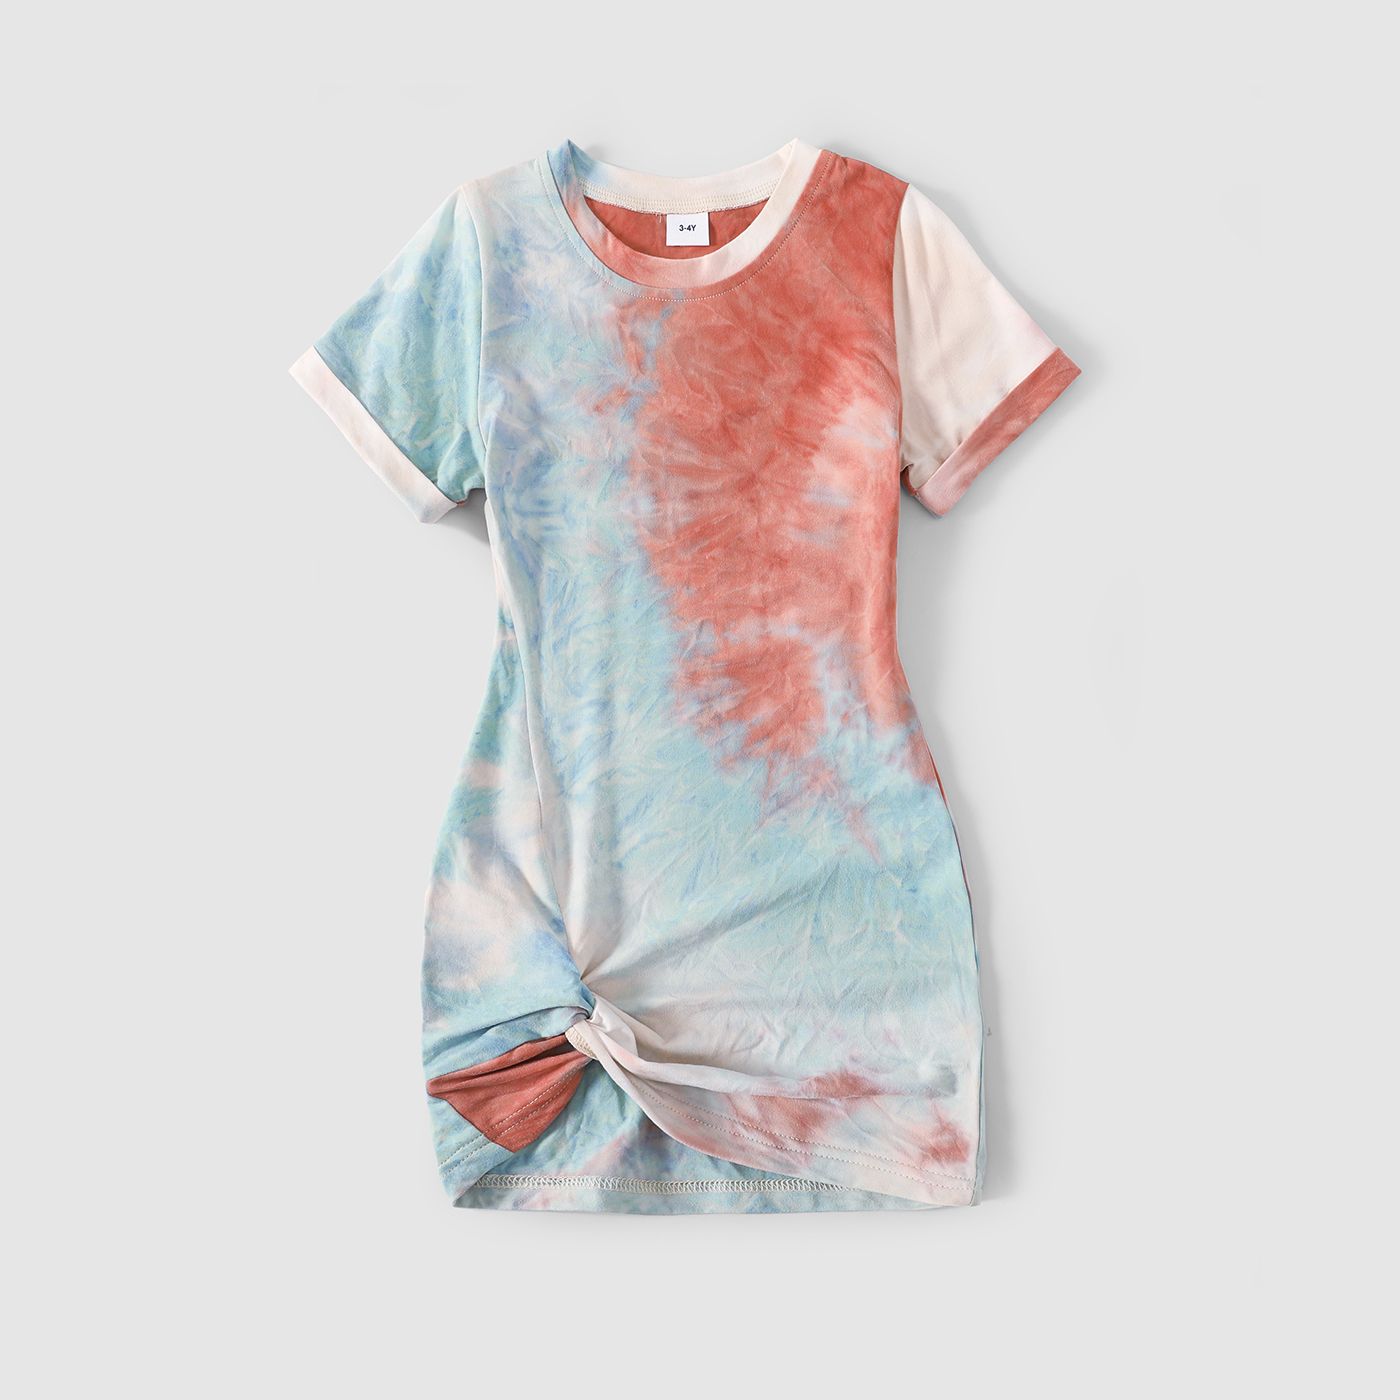 Family Matching Tie Dye Short-sleeve Twist Knot Bodycon Dresses And T-shirts Sets